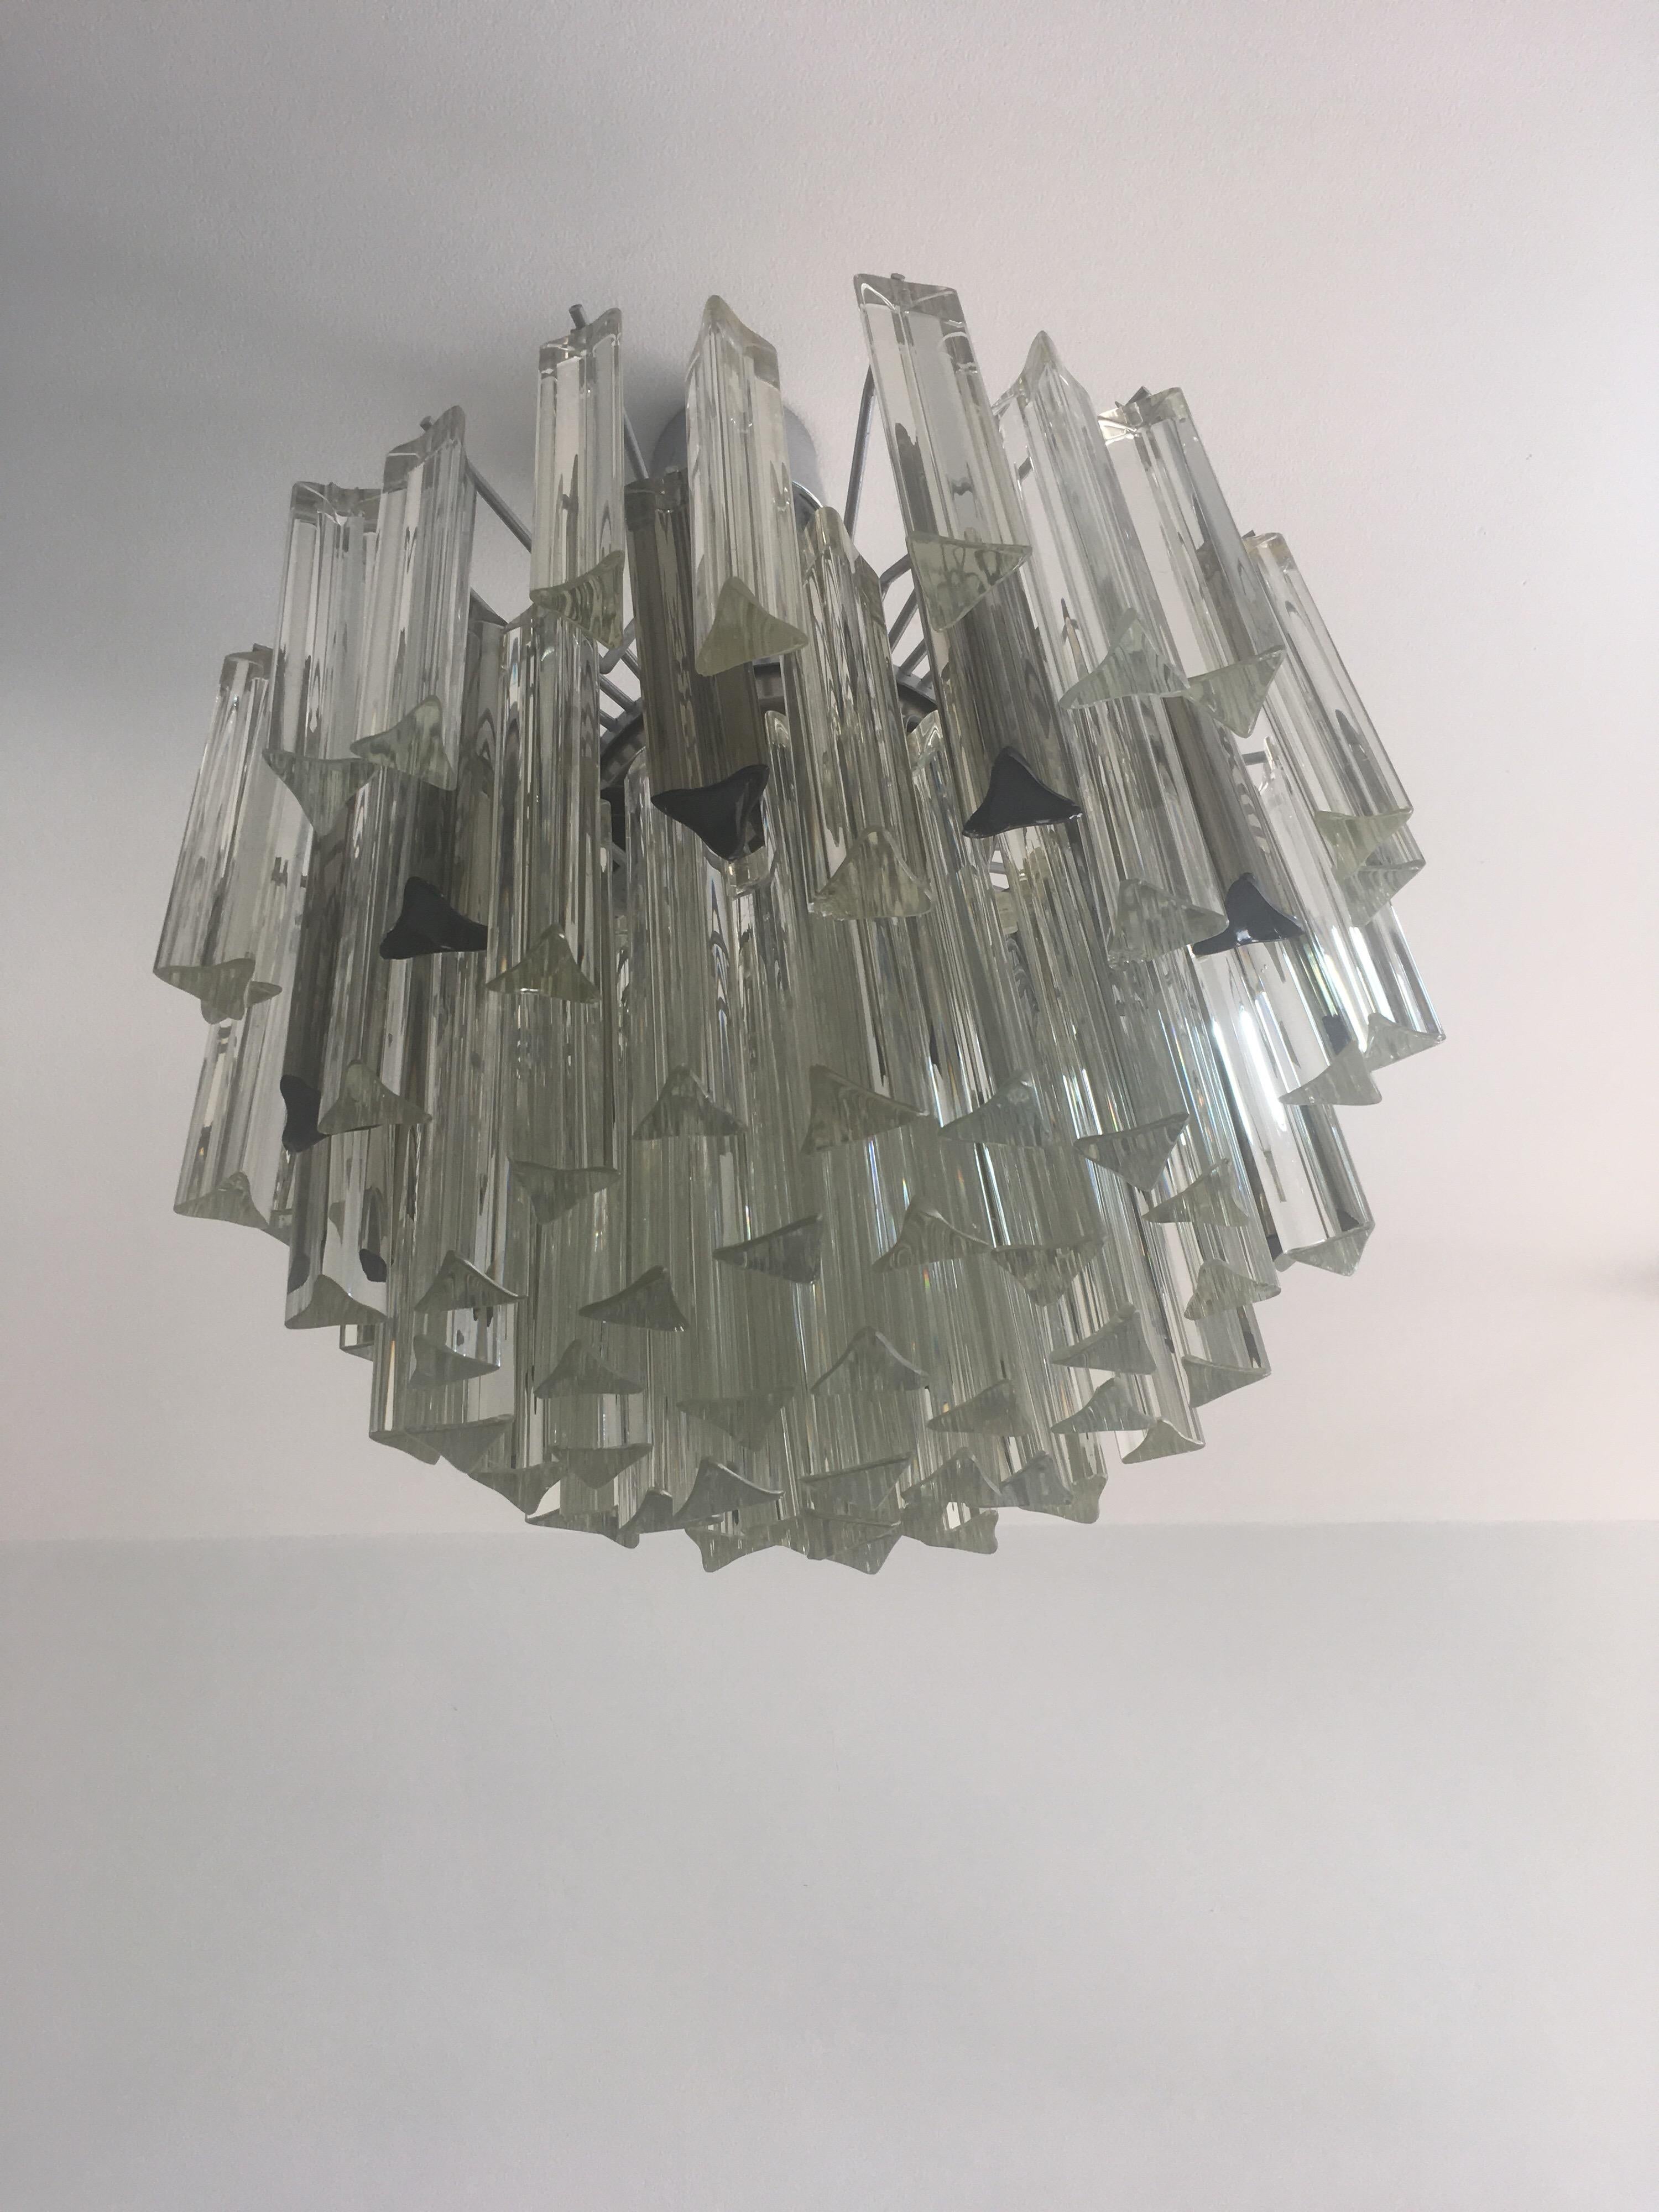 Italian Vintage Murano Glass Chandelier, circa 1970s In Good Condition For Sale In Melbourne, AU